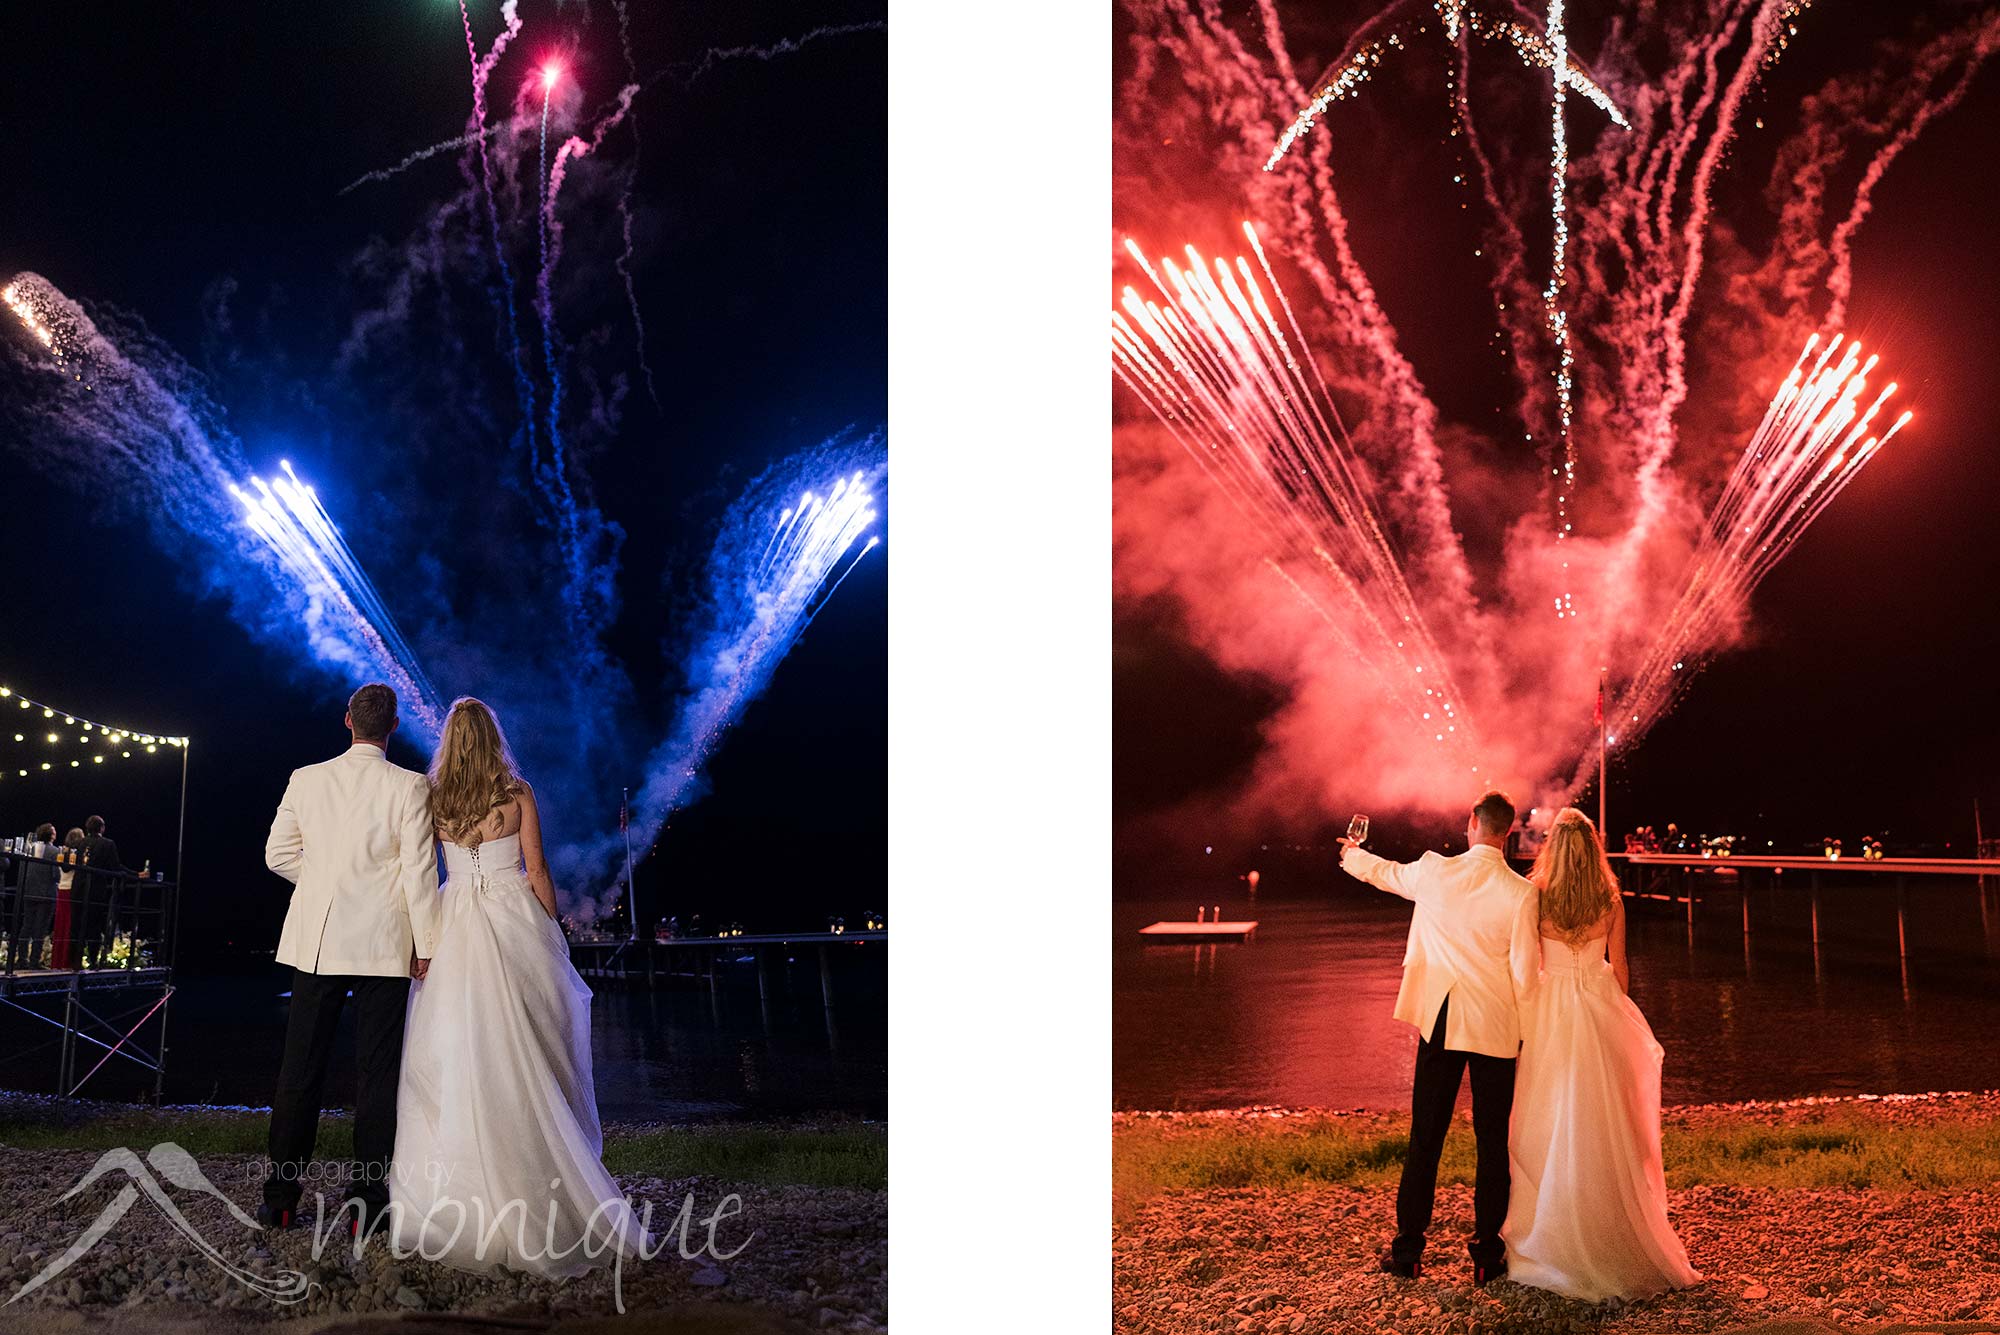 Lake Tahoe private estate wedding photography with the bride and groom Rachel and Bruce Taylor fireworks on the pier at sunset, Photography by Monique